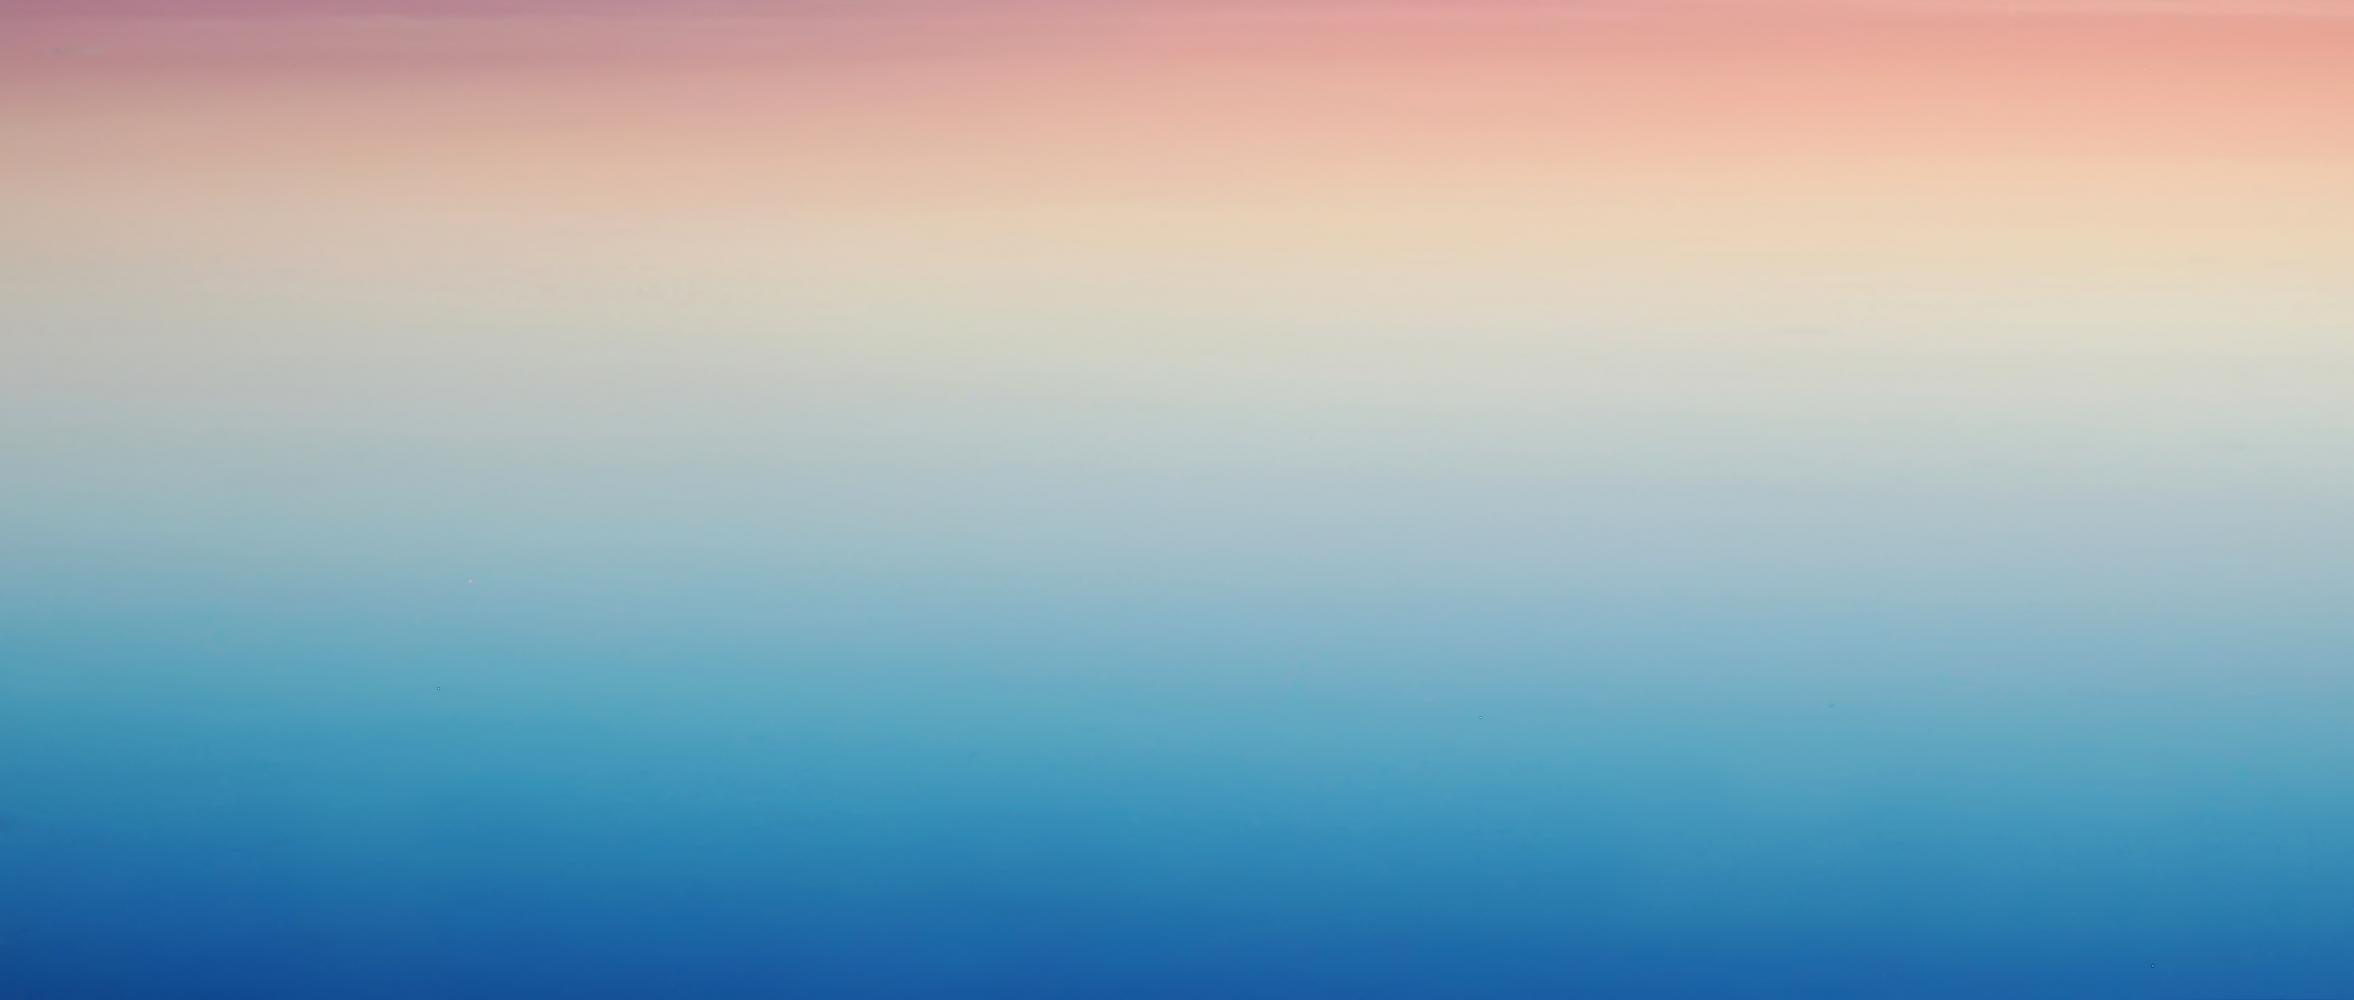 Blue and pink gradient sky